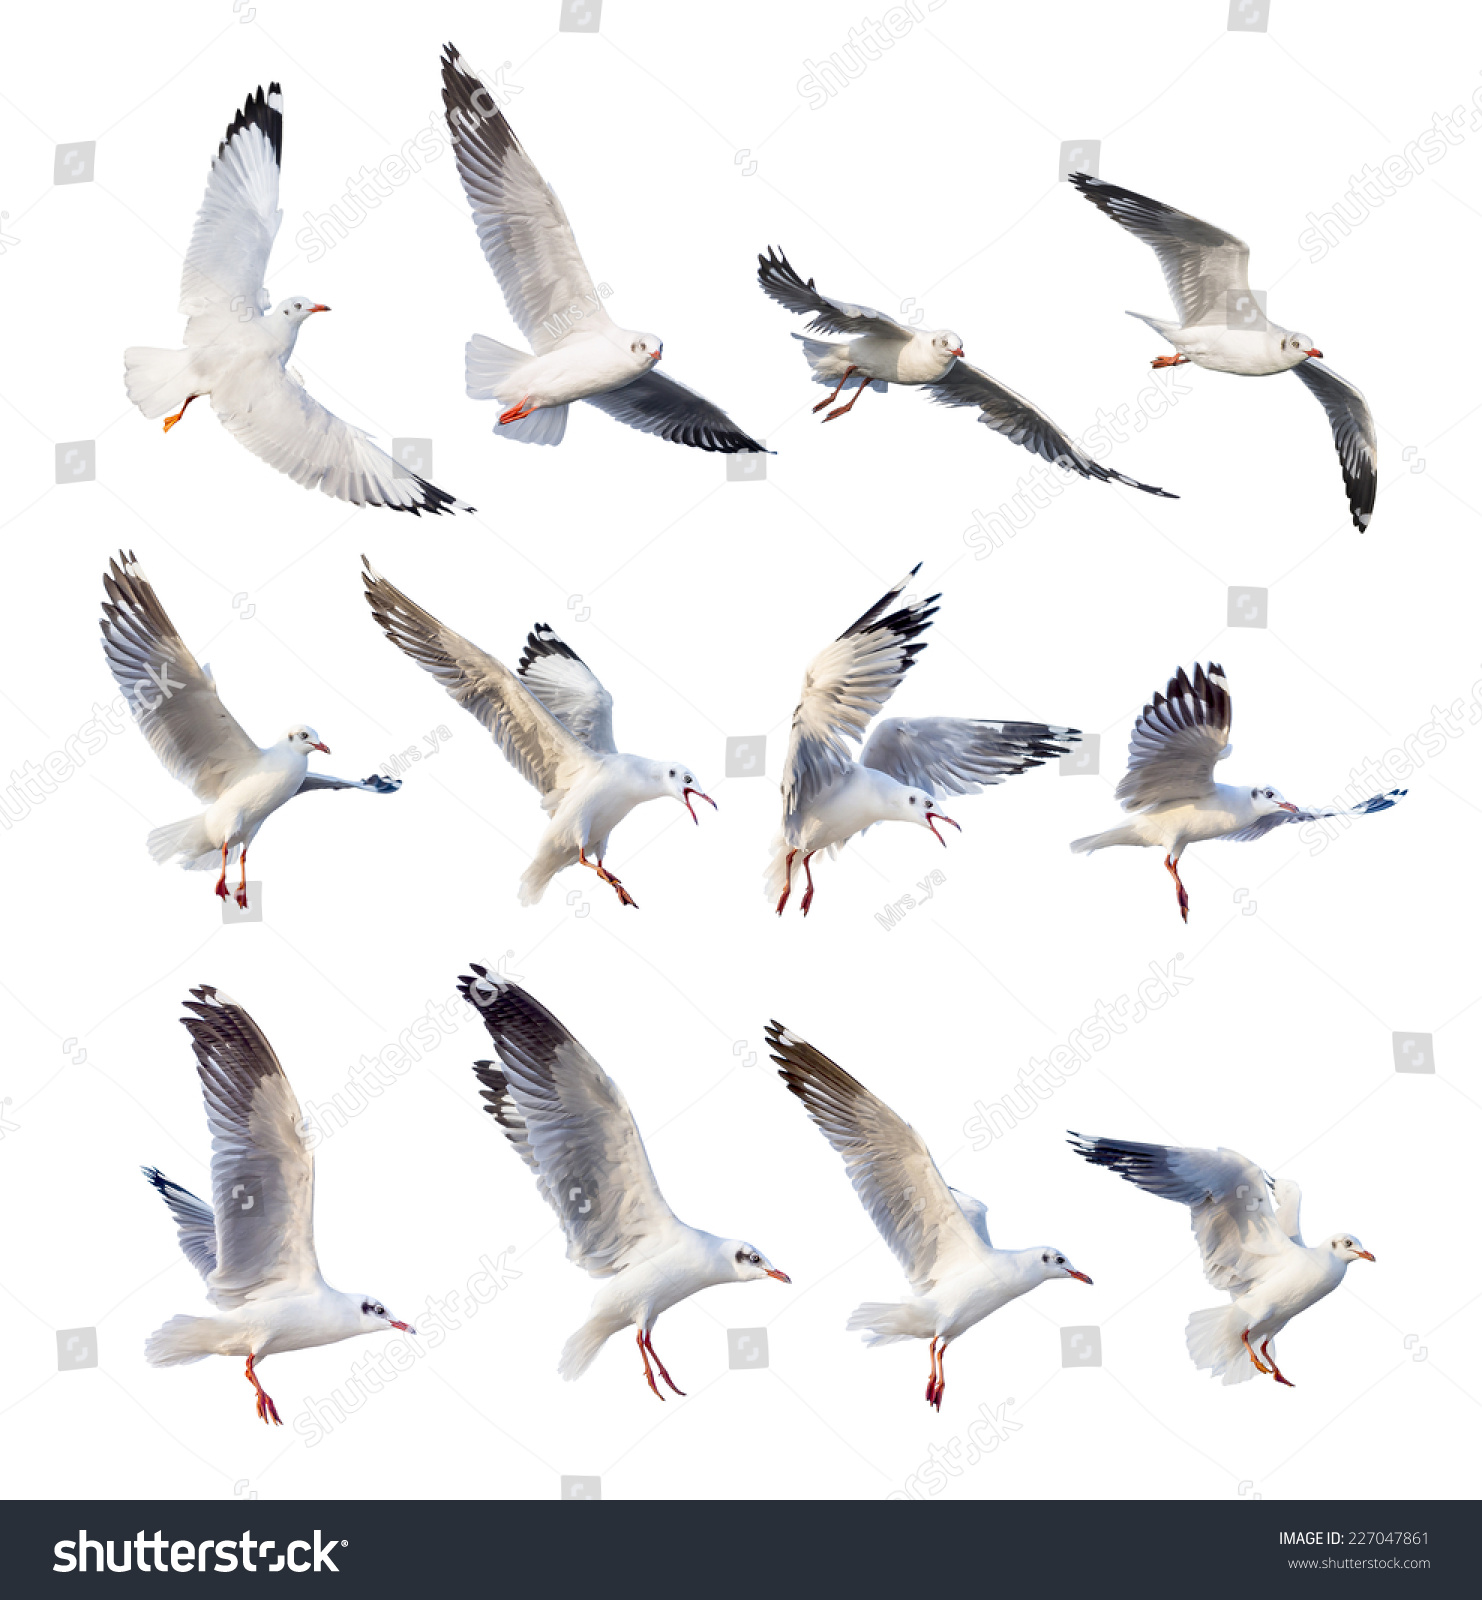 Flying Seagull Actions Isolated On White Stock Photo 227047861 ...